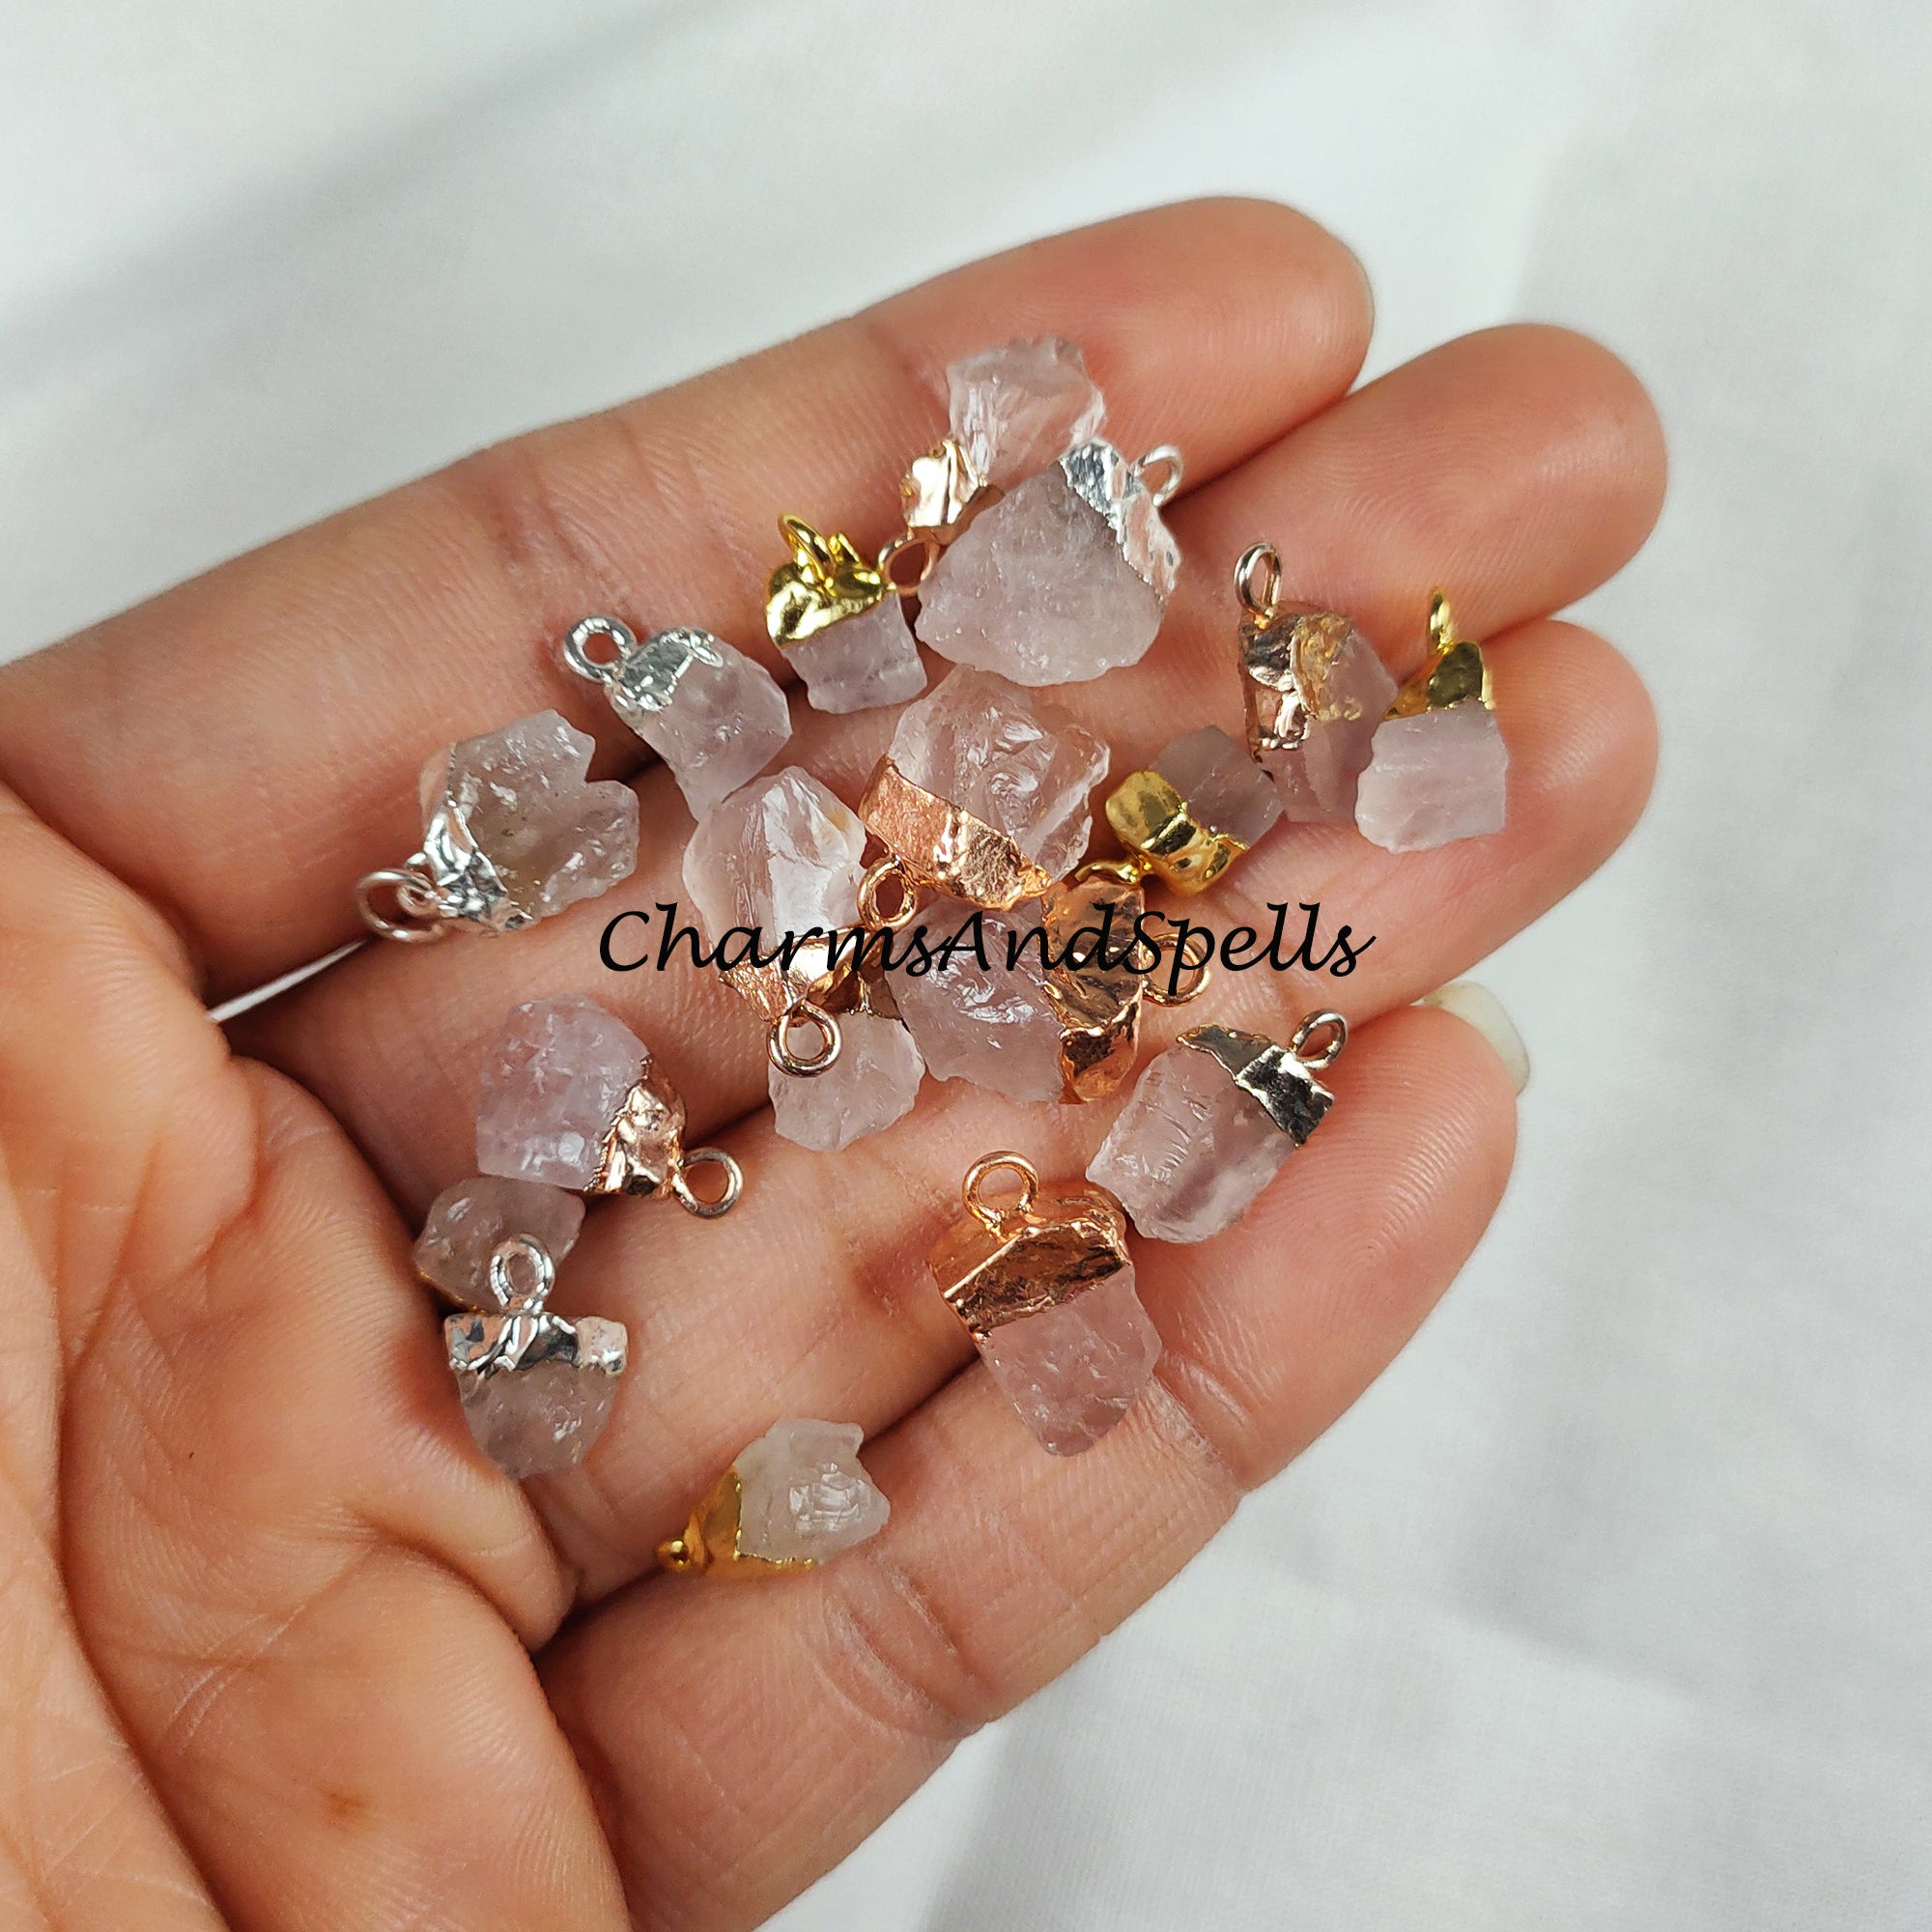 Big Sale On Raw Rose Quartz Electroplated Pendant Connectors, Gemstone Connectors, Sold By Piece